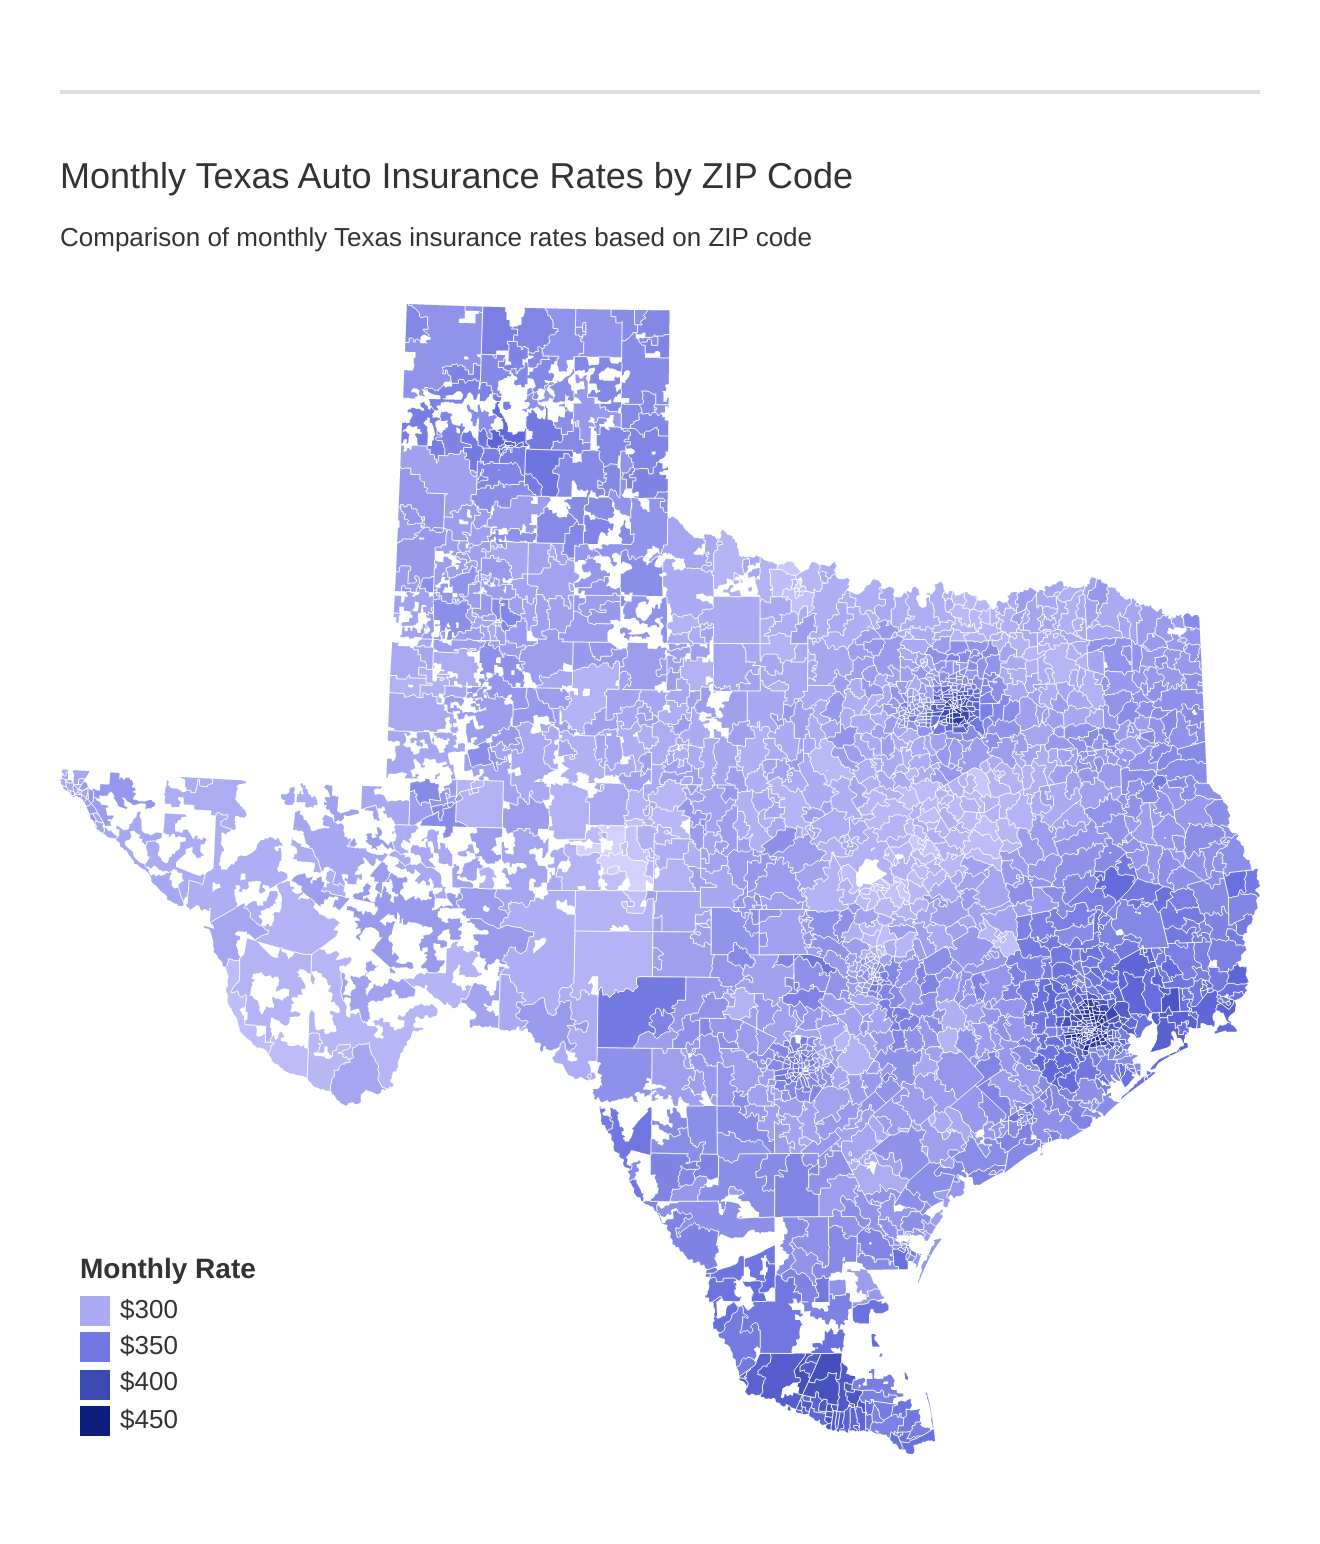 Monthly Texas Auto Insurance Rates by ZIP Code